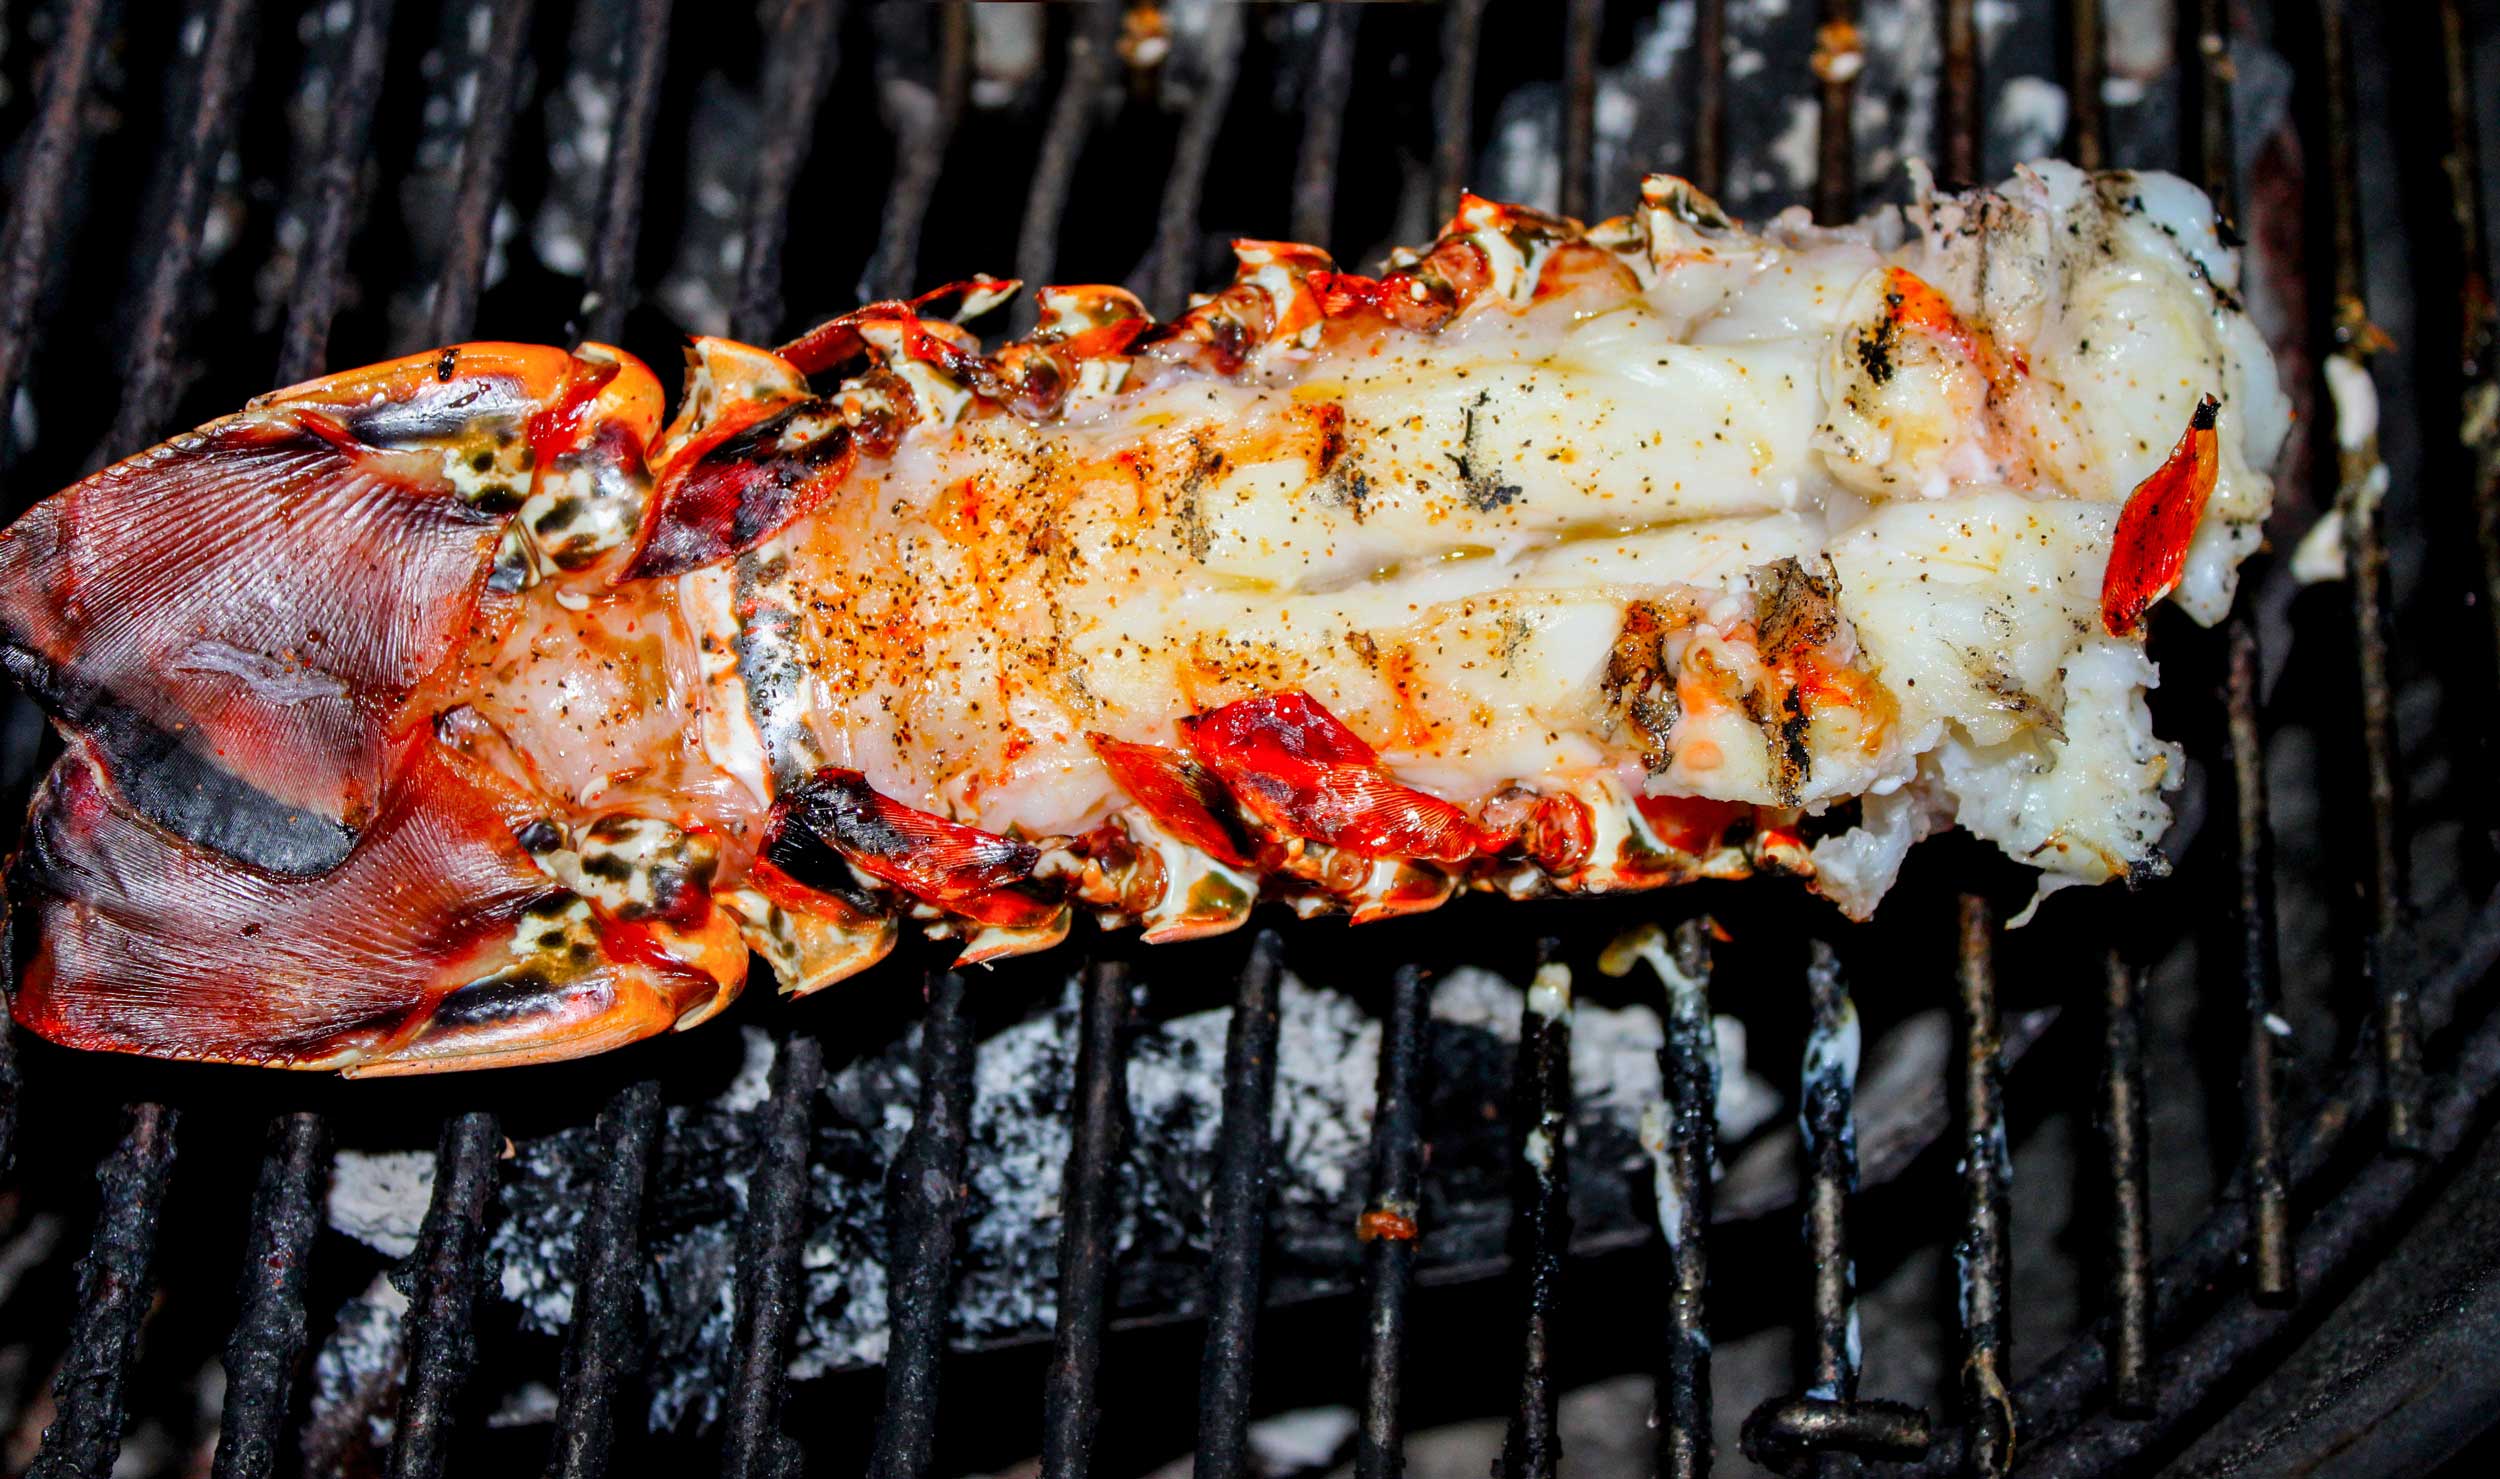 A seasoned lobster tail cooking on a barbeque grill